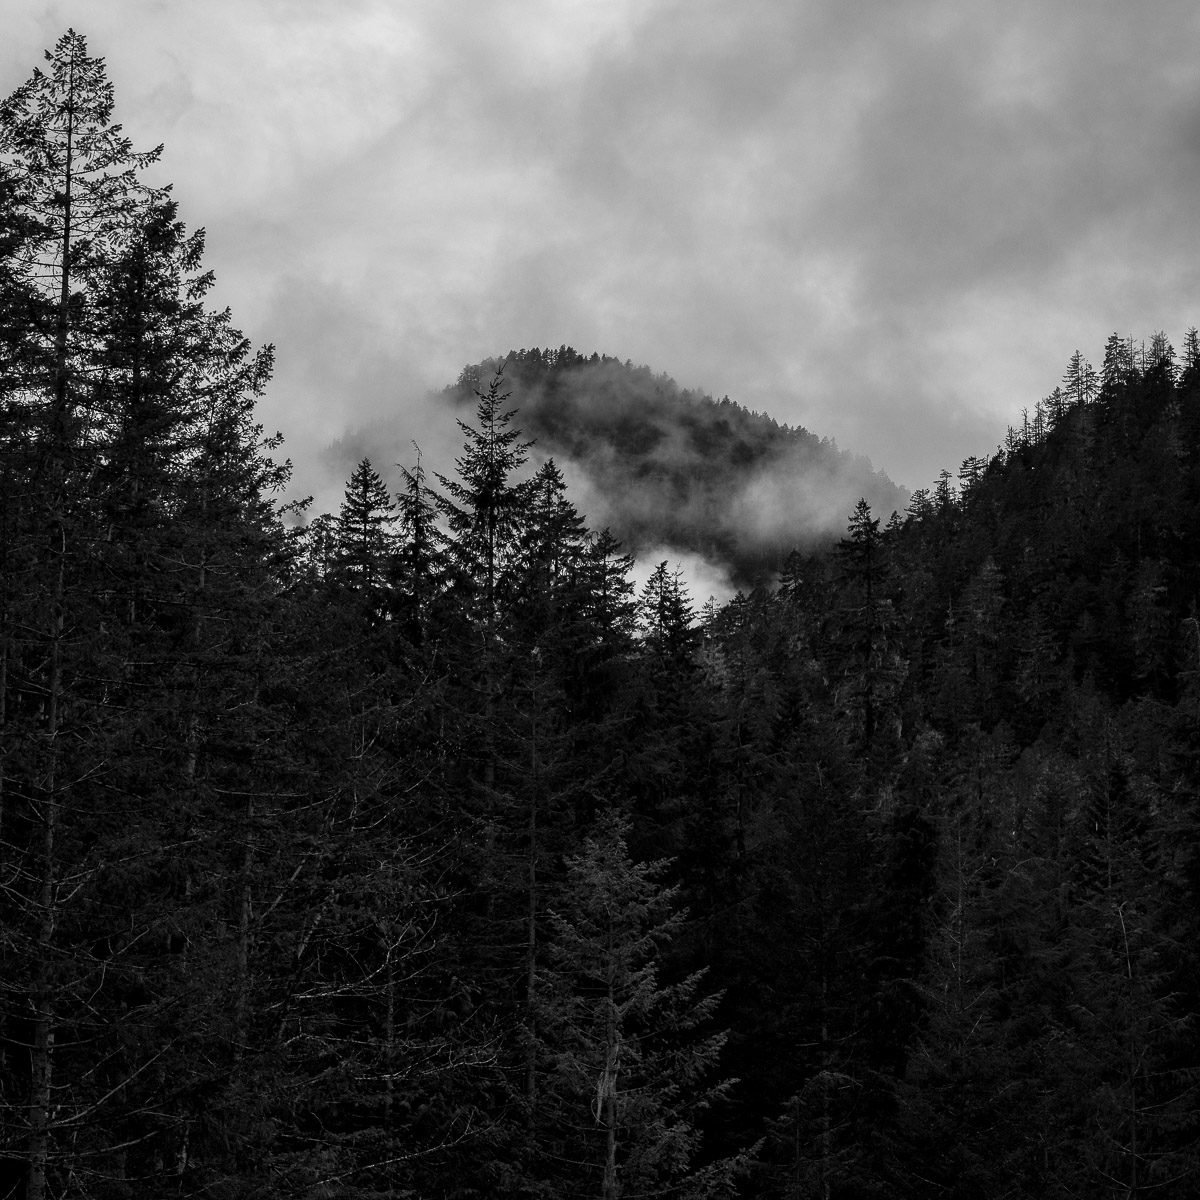 A black and white landscape photograph looking up through the Jefferson Creek Valley towards an unnamed ridge in rural Mason County, Washington.